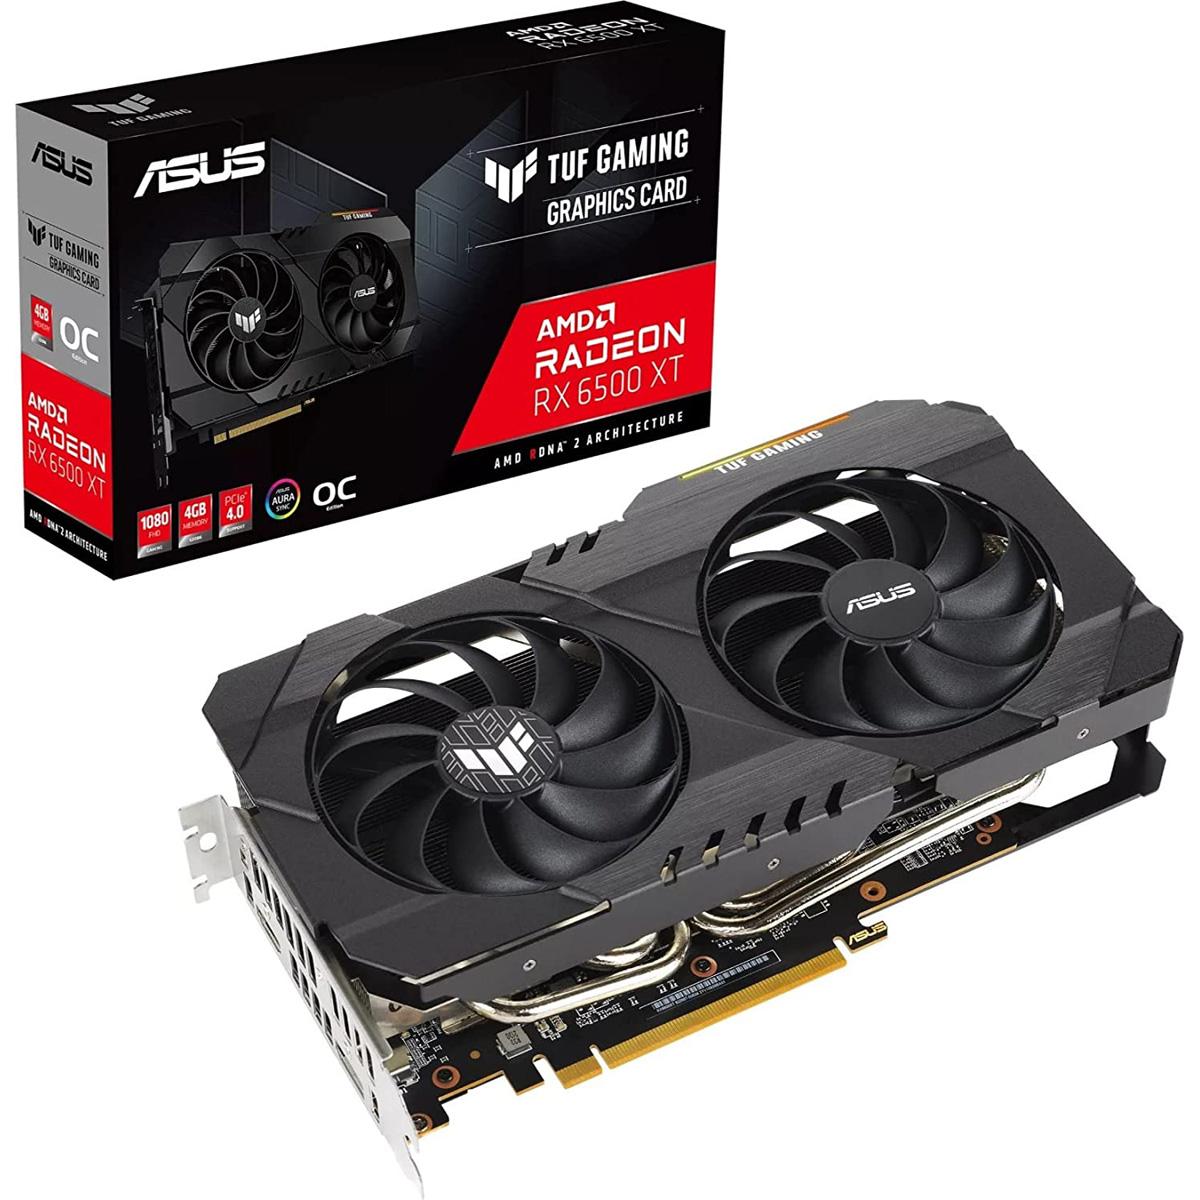 Asus TUF Gaming AMD Radeon RX6500 XT OC Graphics Card for $99.99 Shipped